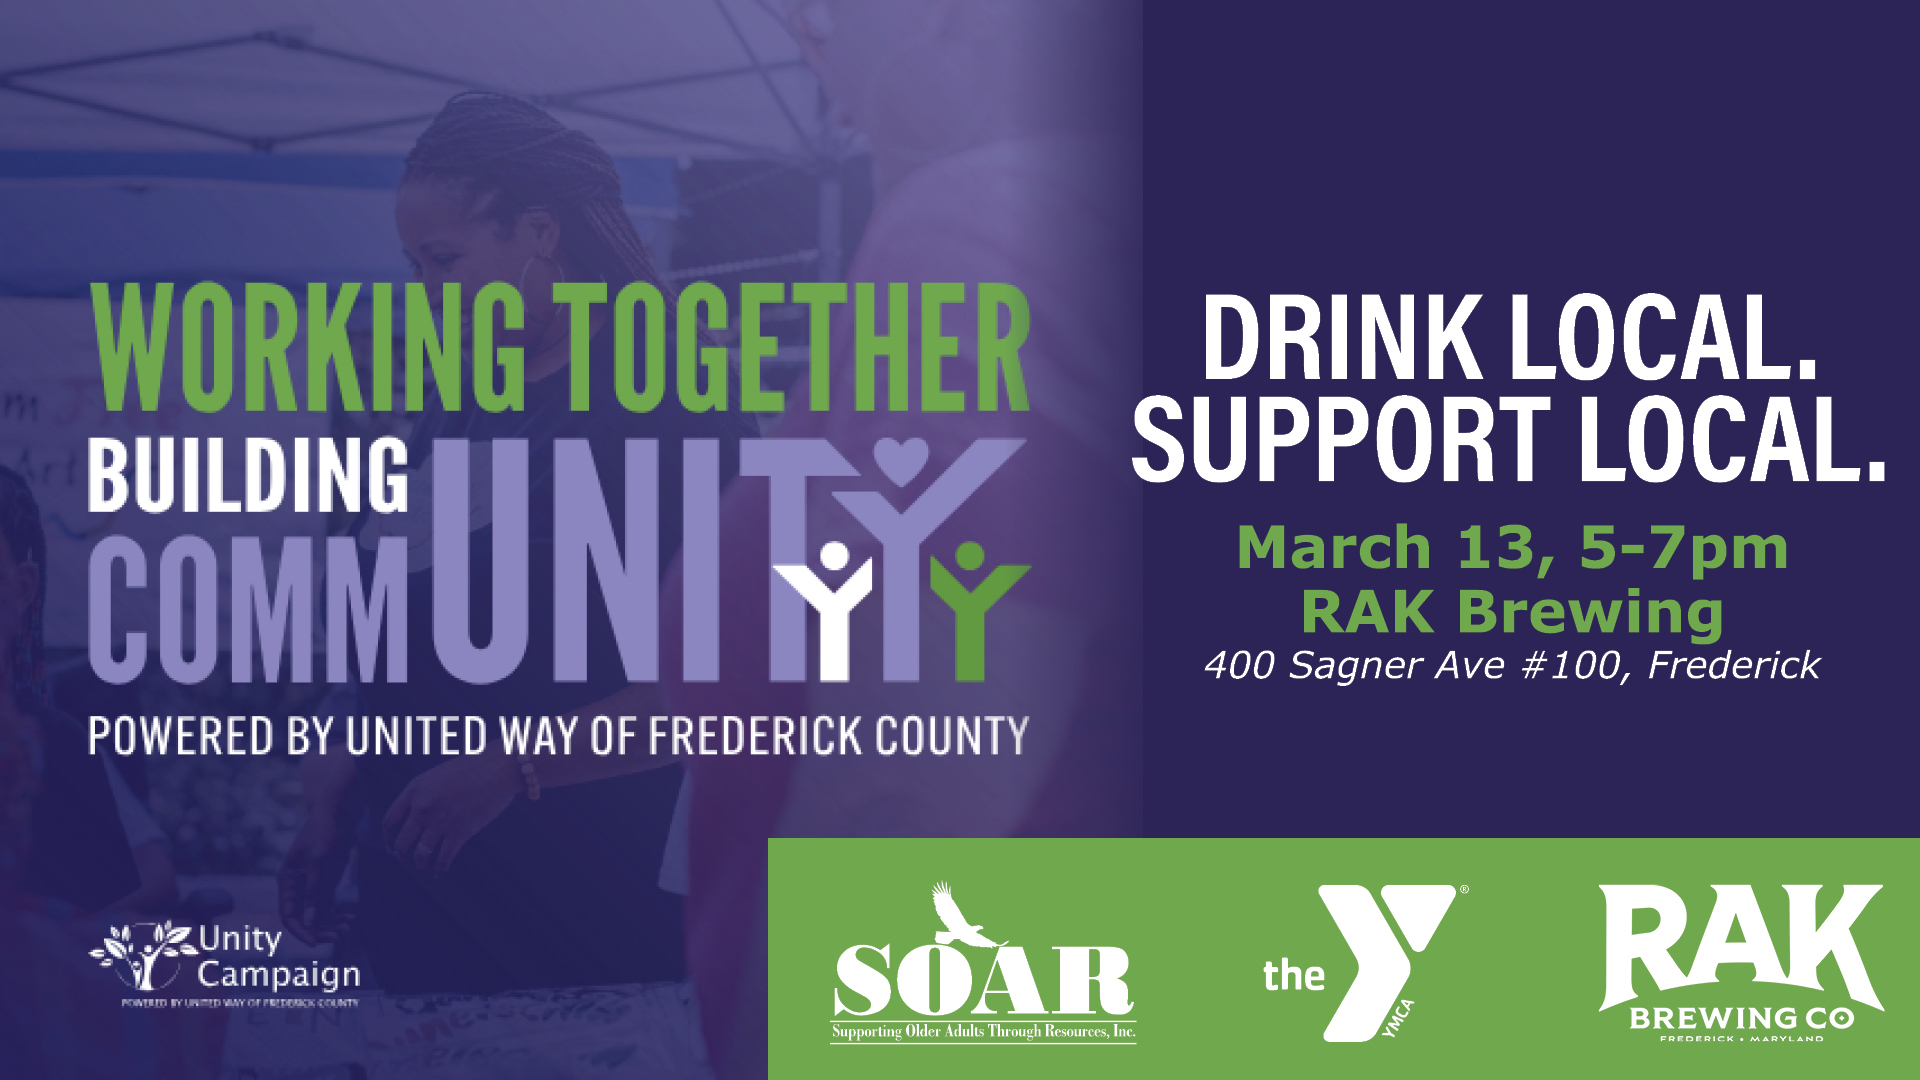 Drink Local Support Local event as part of Unity Campaign